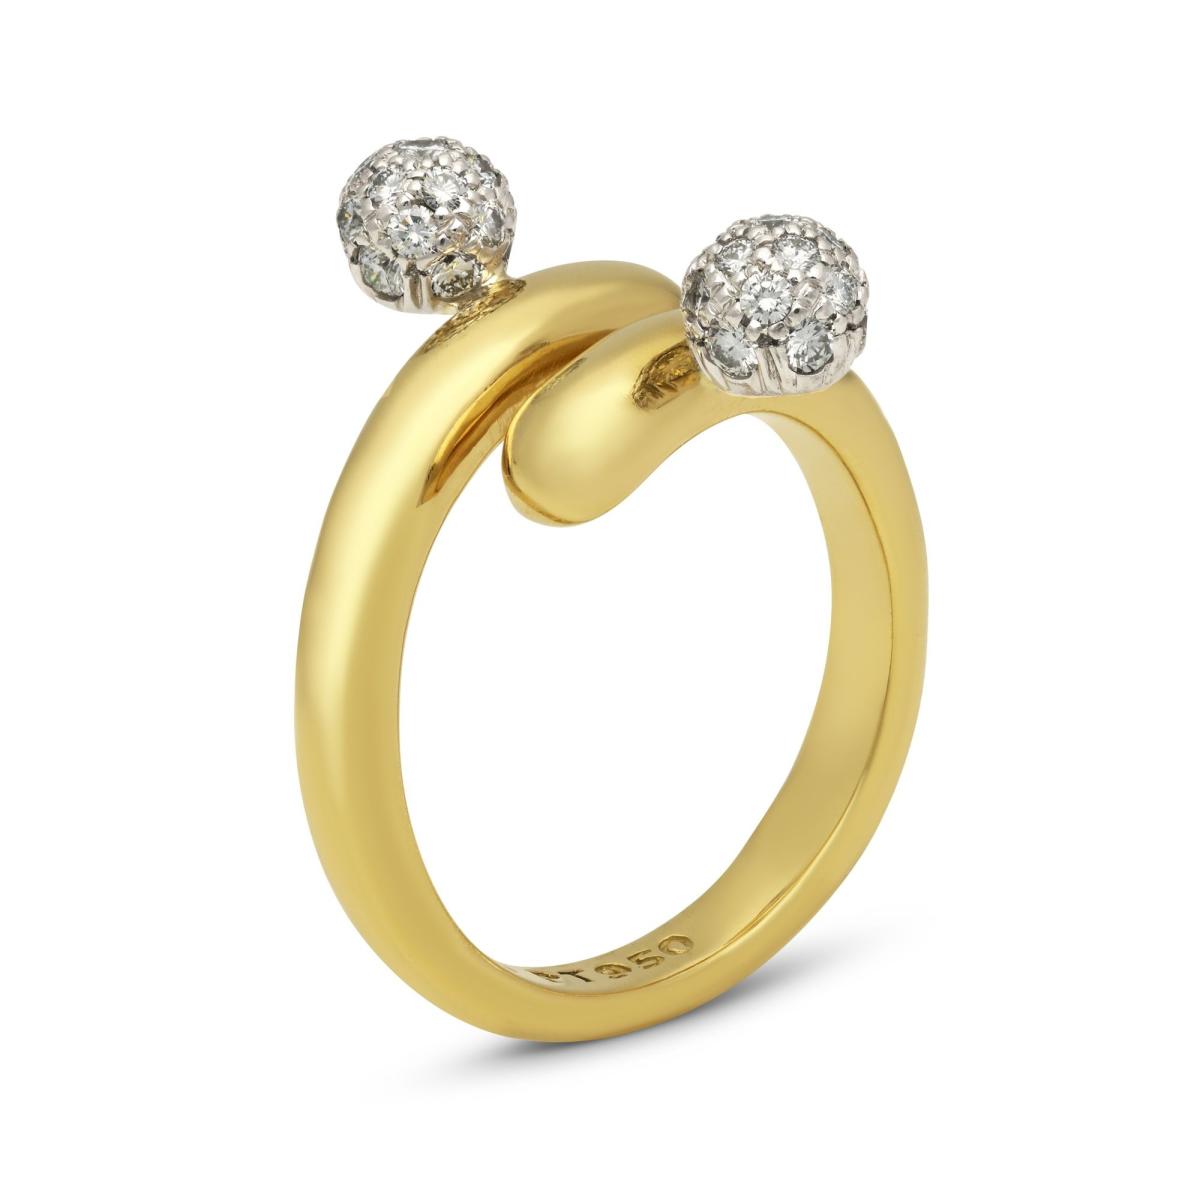 Tiffany Knot Ring in Yellow Gold with Diamonds| Tiffany & Co.